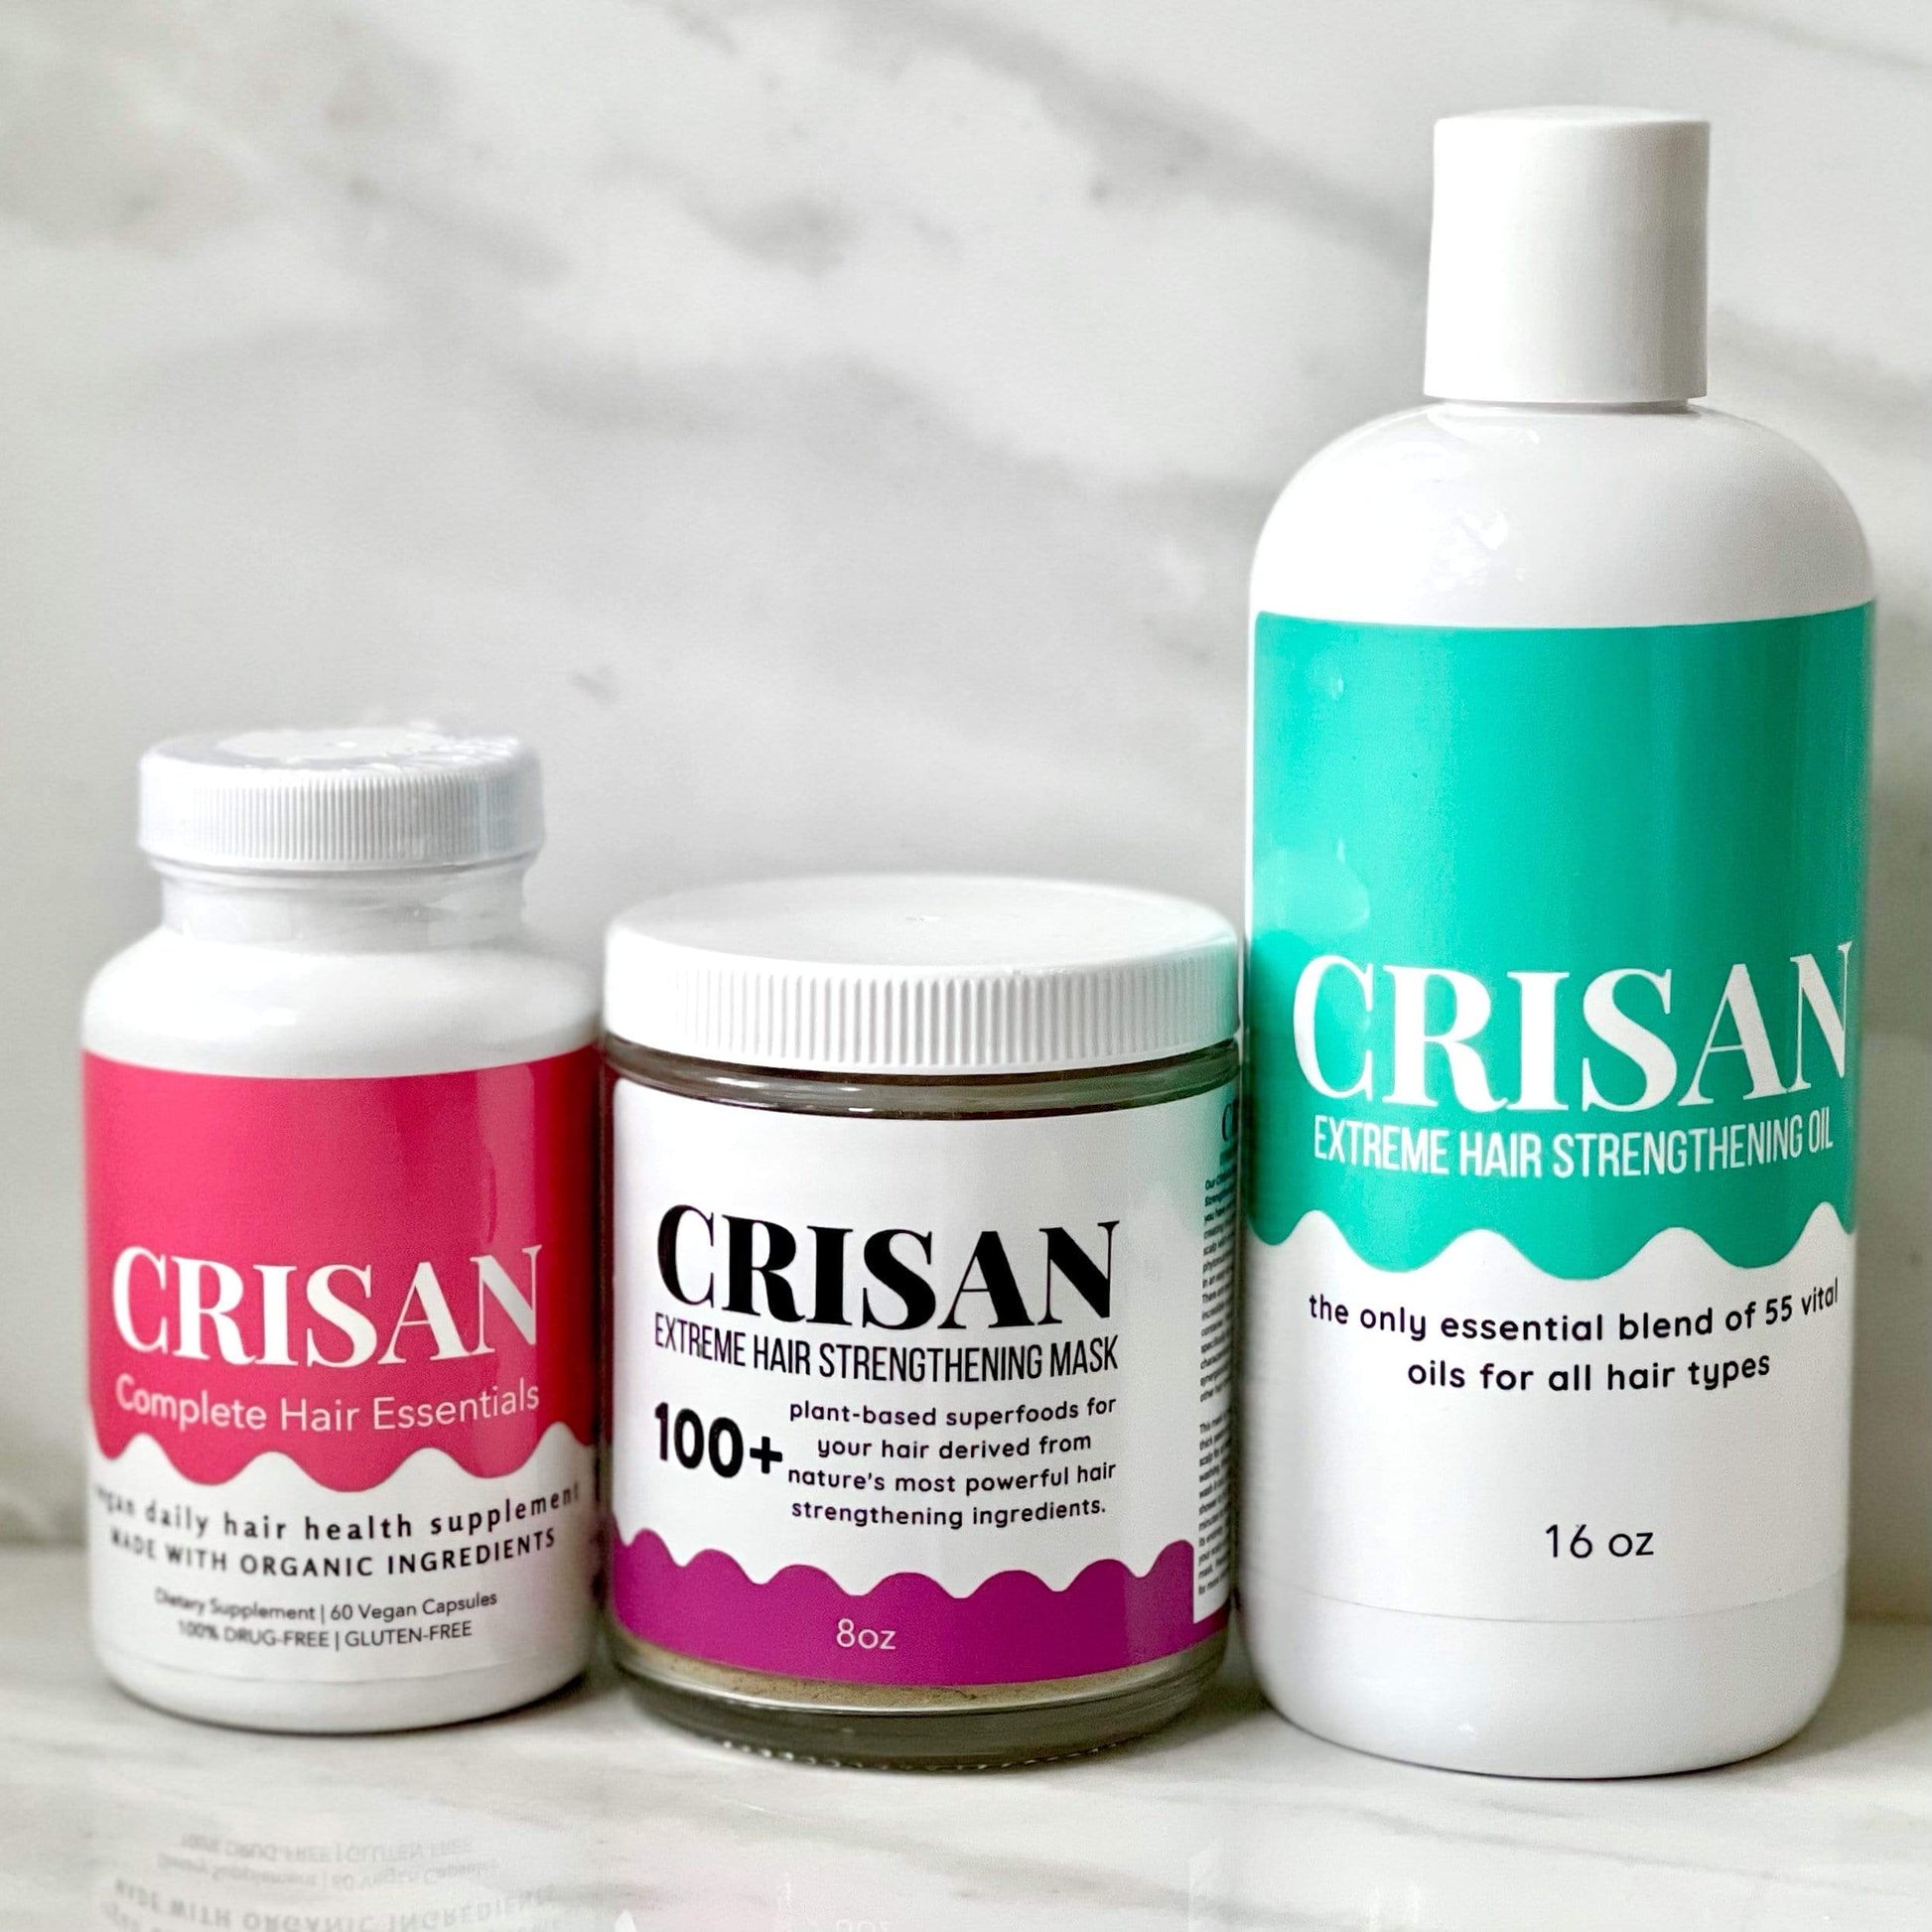 The Complete Hair Growth Kit